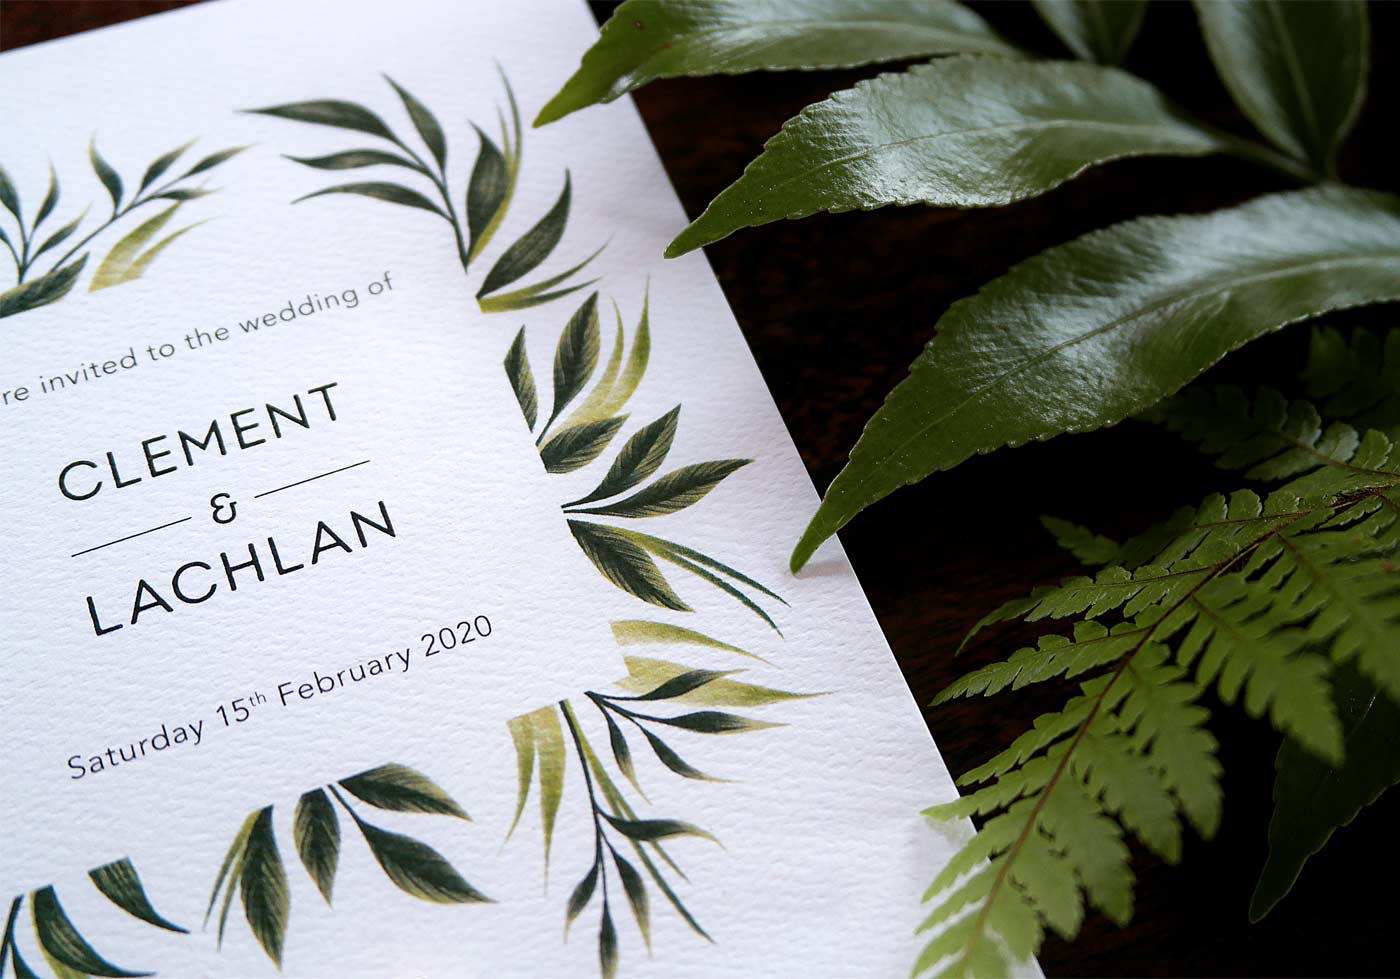 Foliage wedding invitation paper detail by Andrea Muller